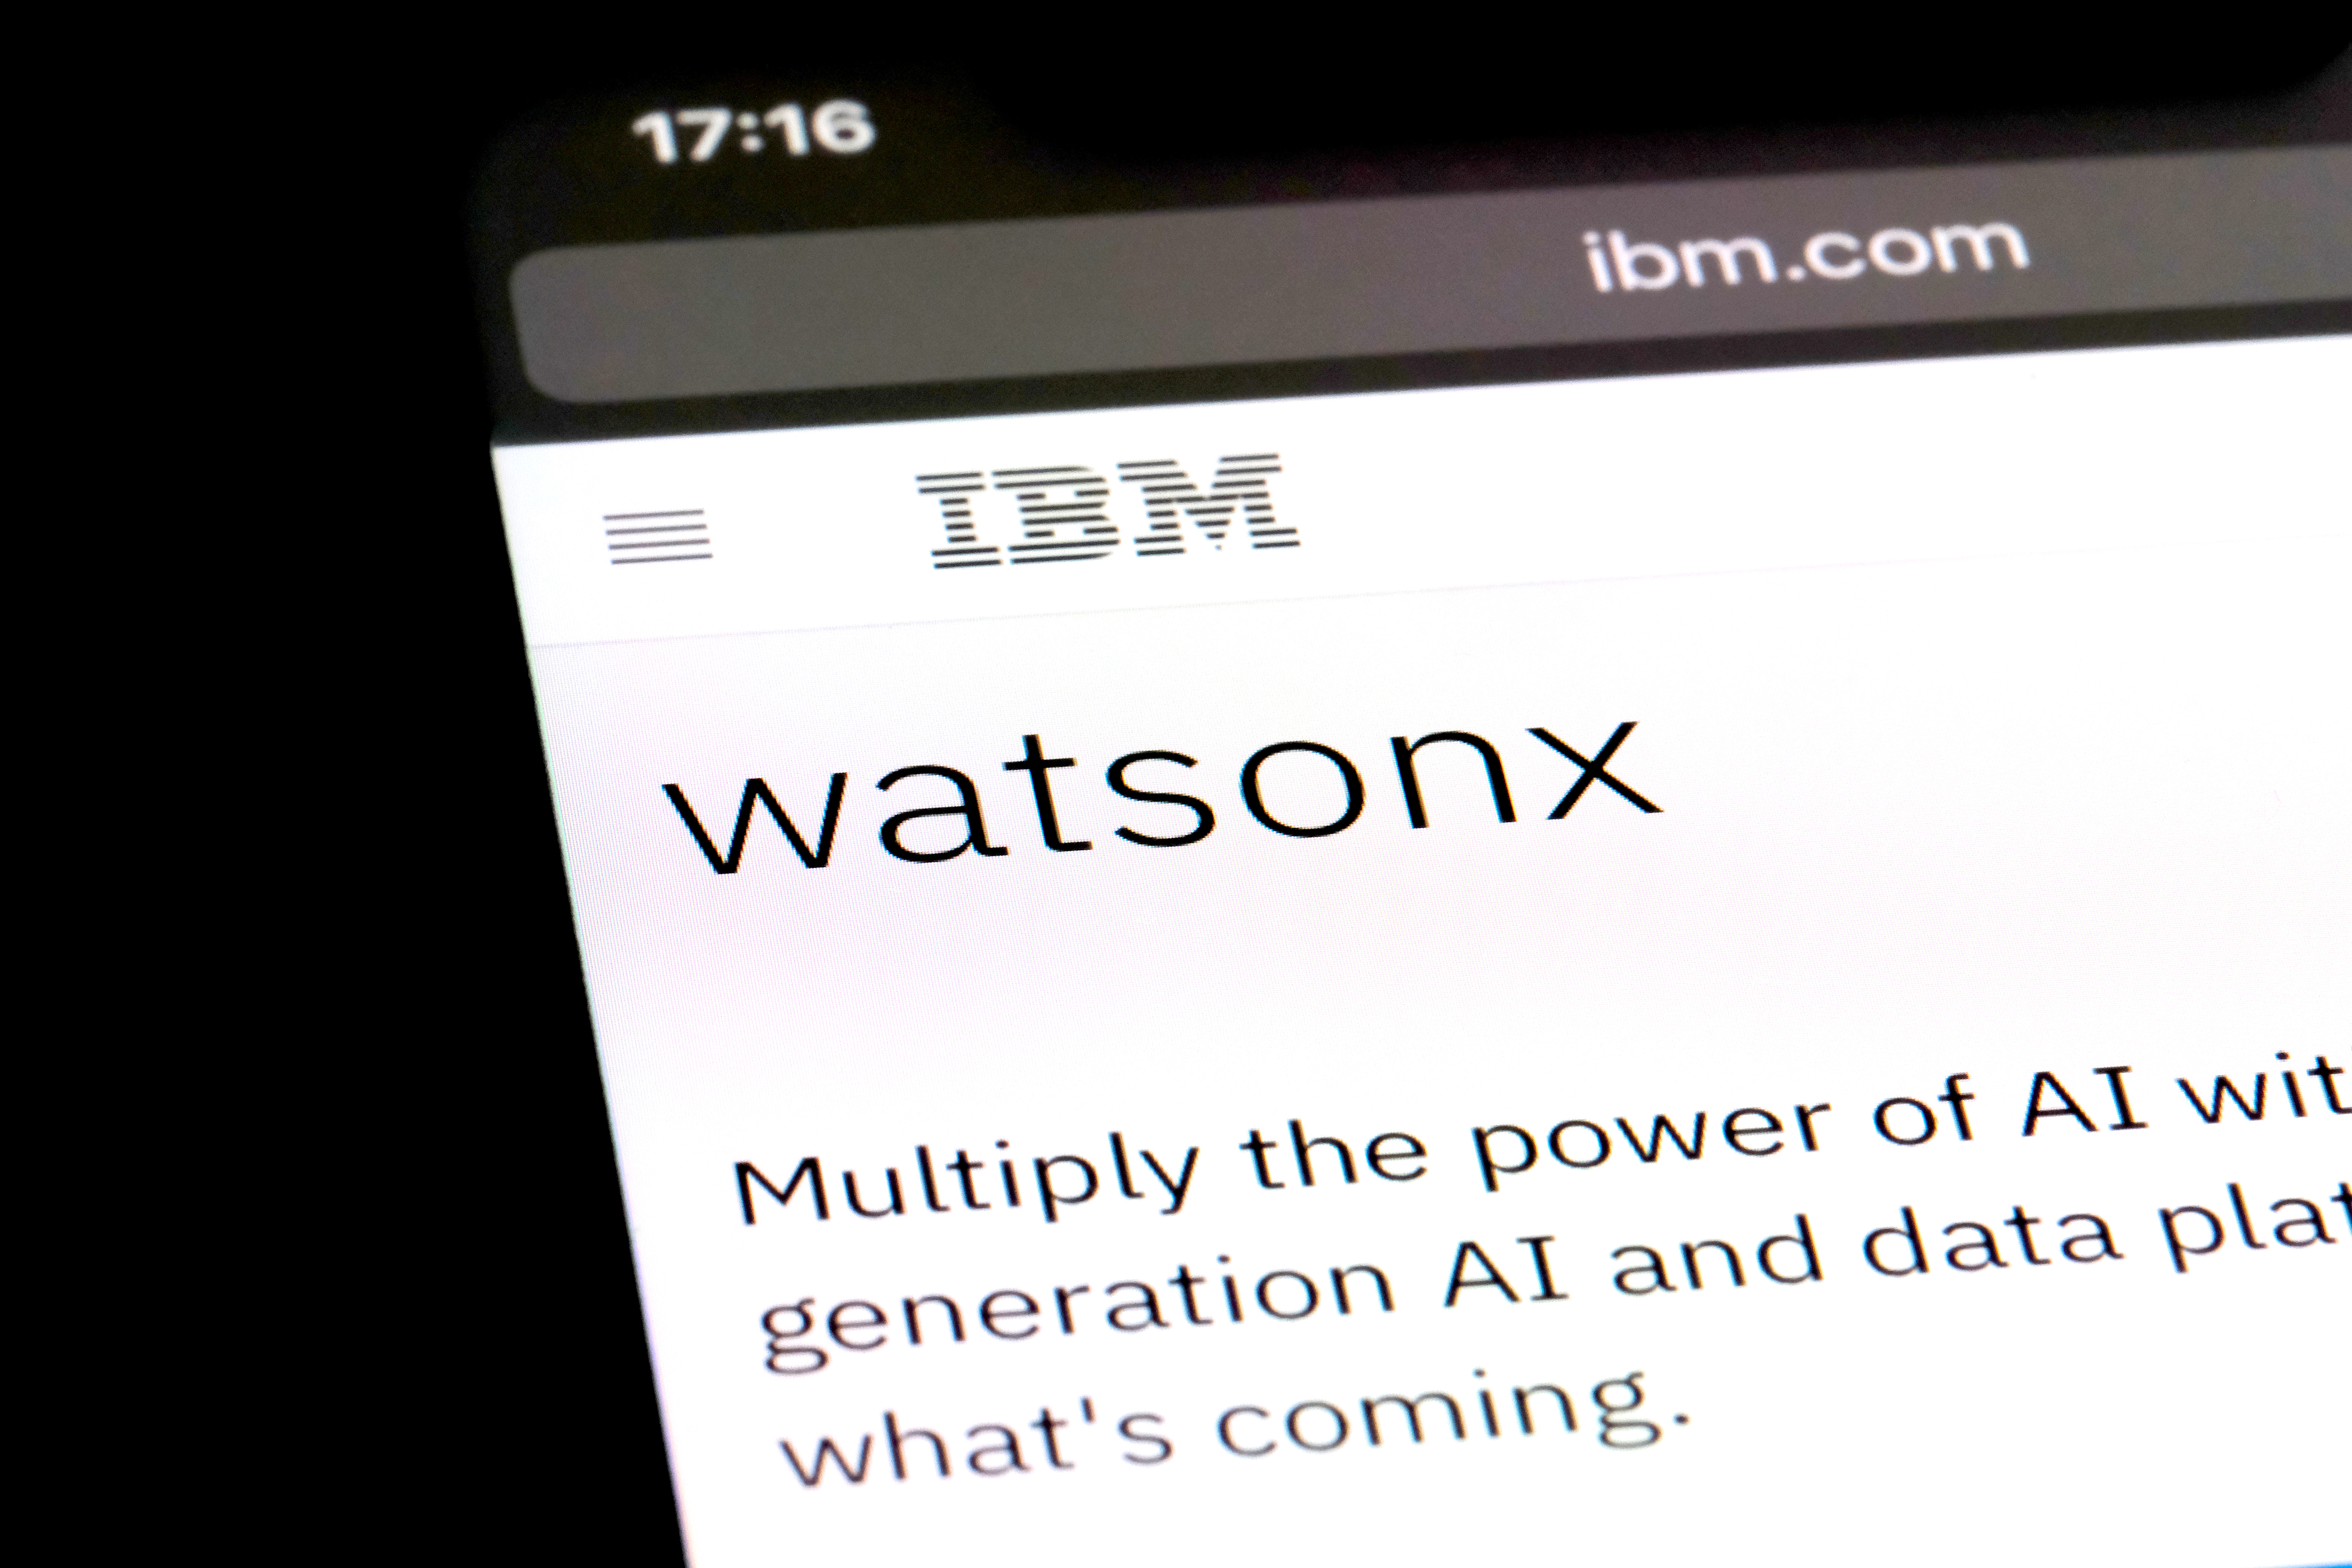 IBM turns the corner with Watson: Why 2.0 is a breakthrough opportunity